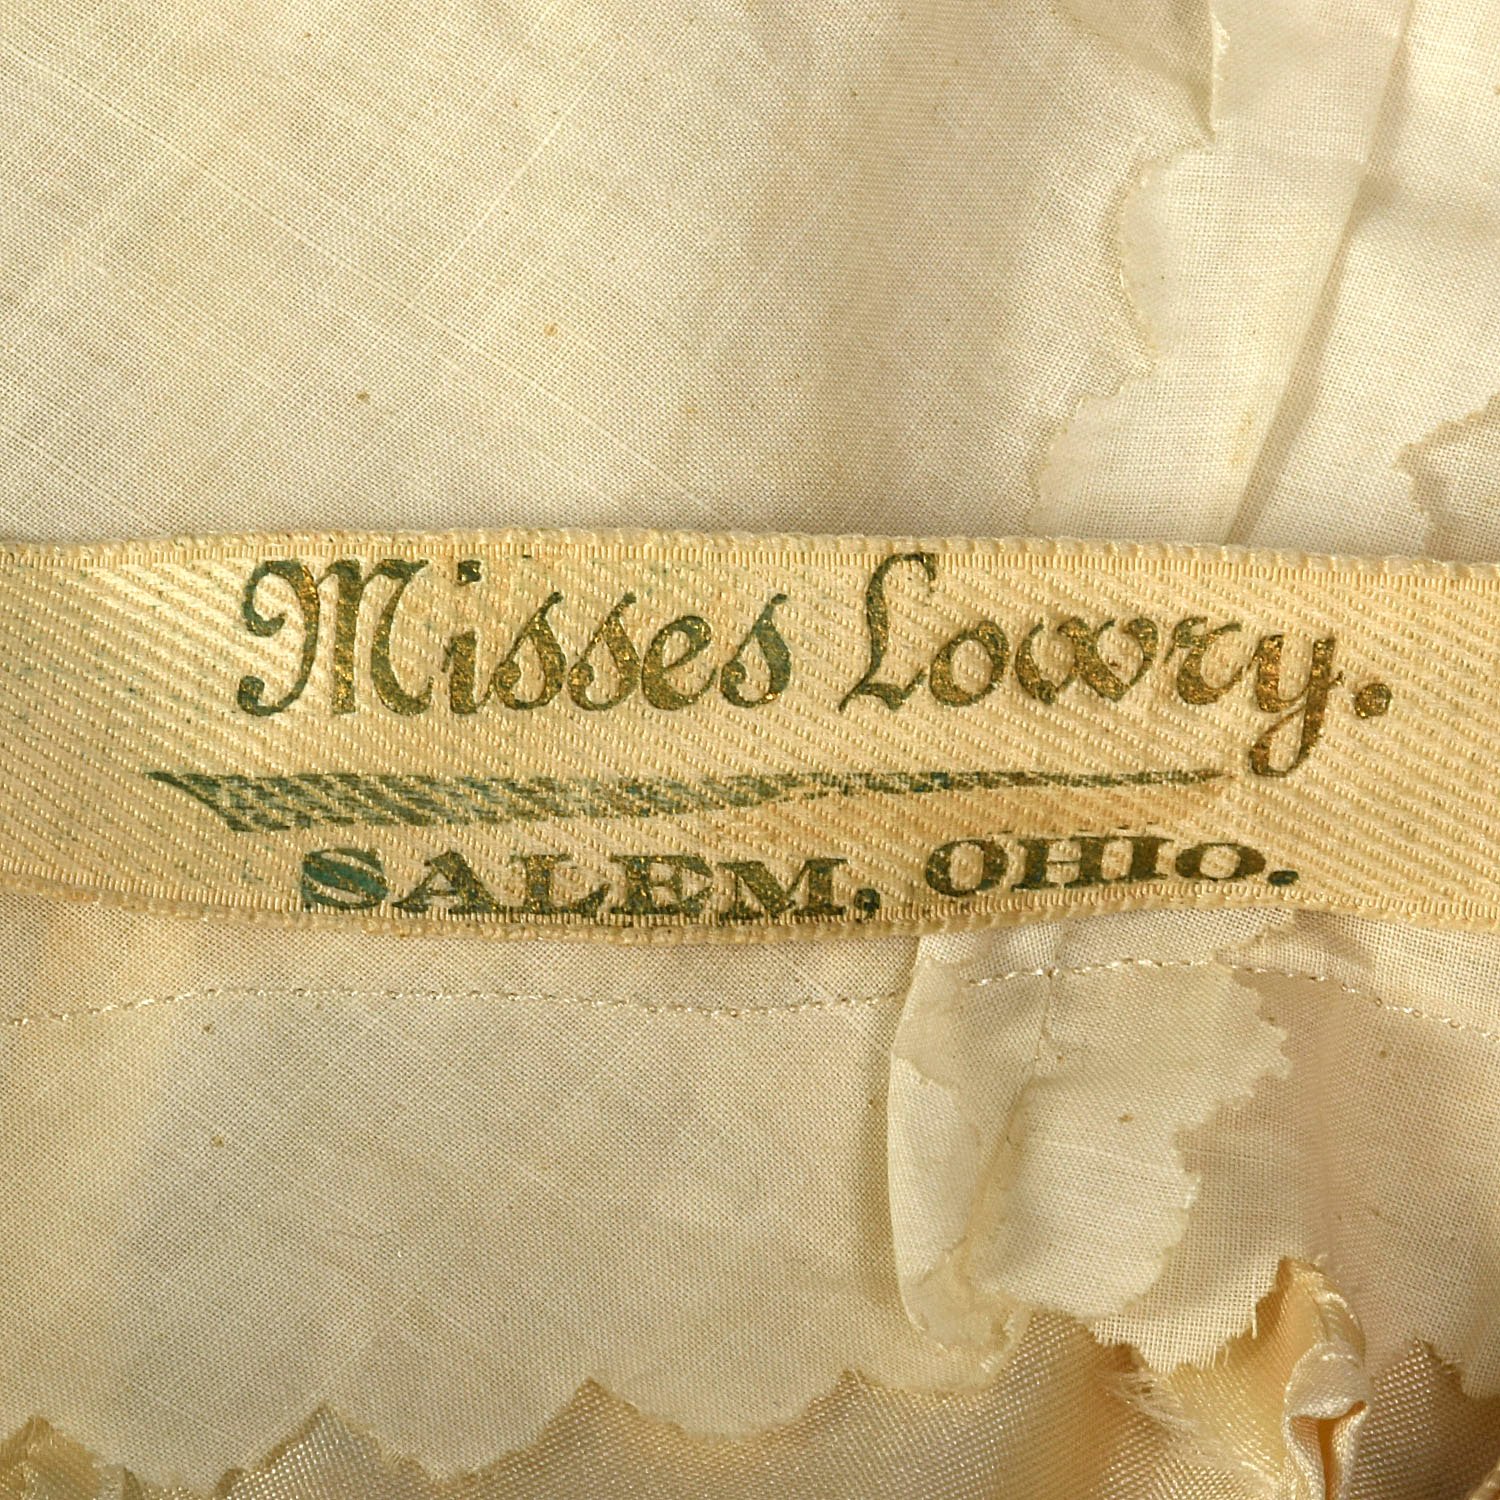 Misses Lowry label from a 1900s dress